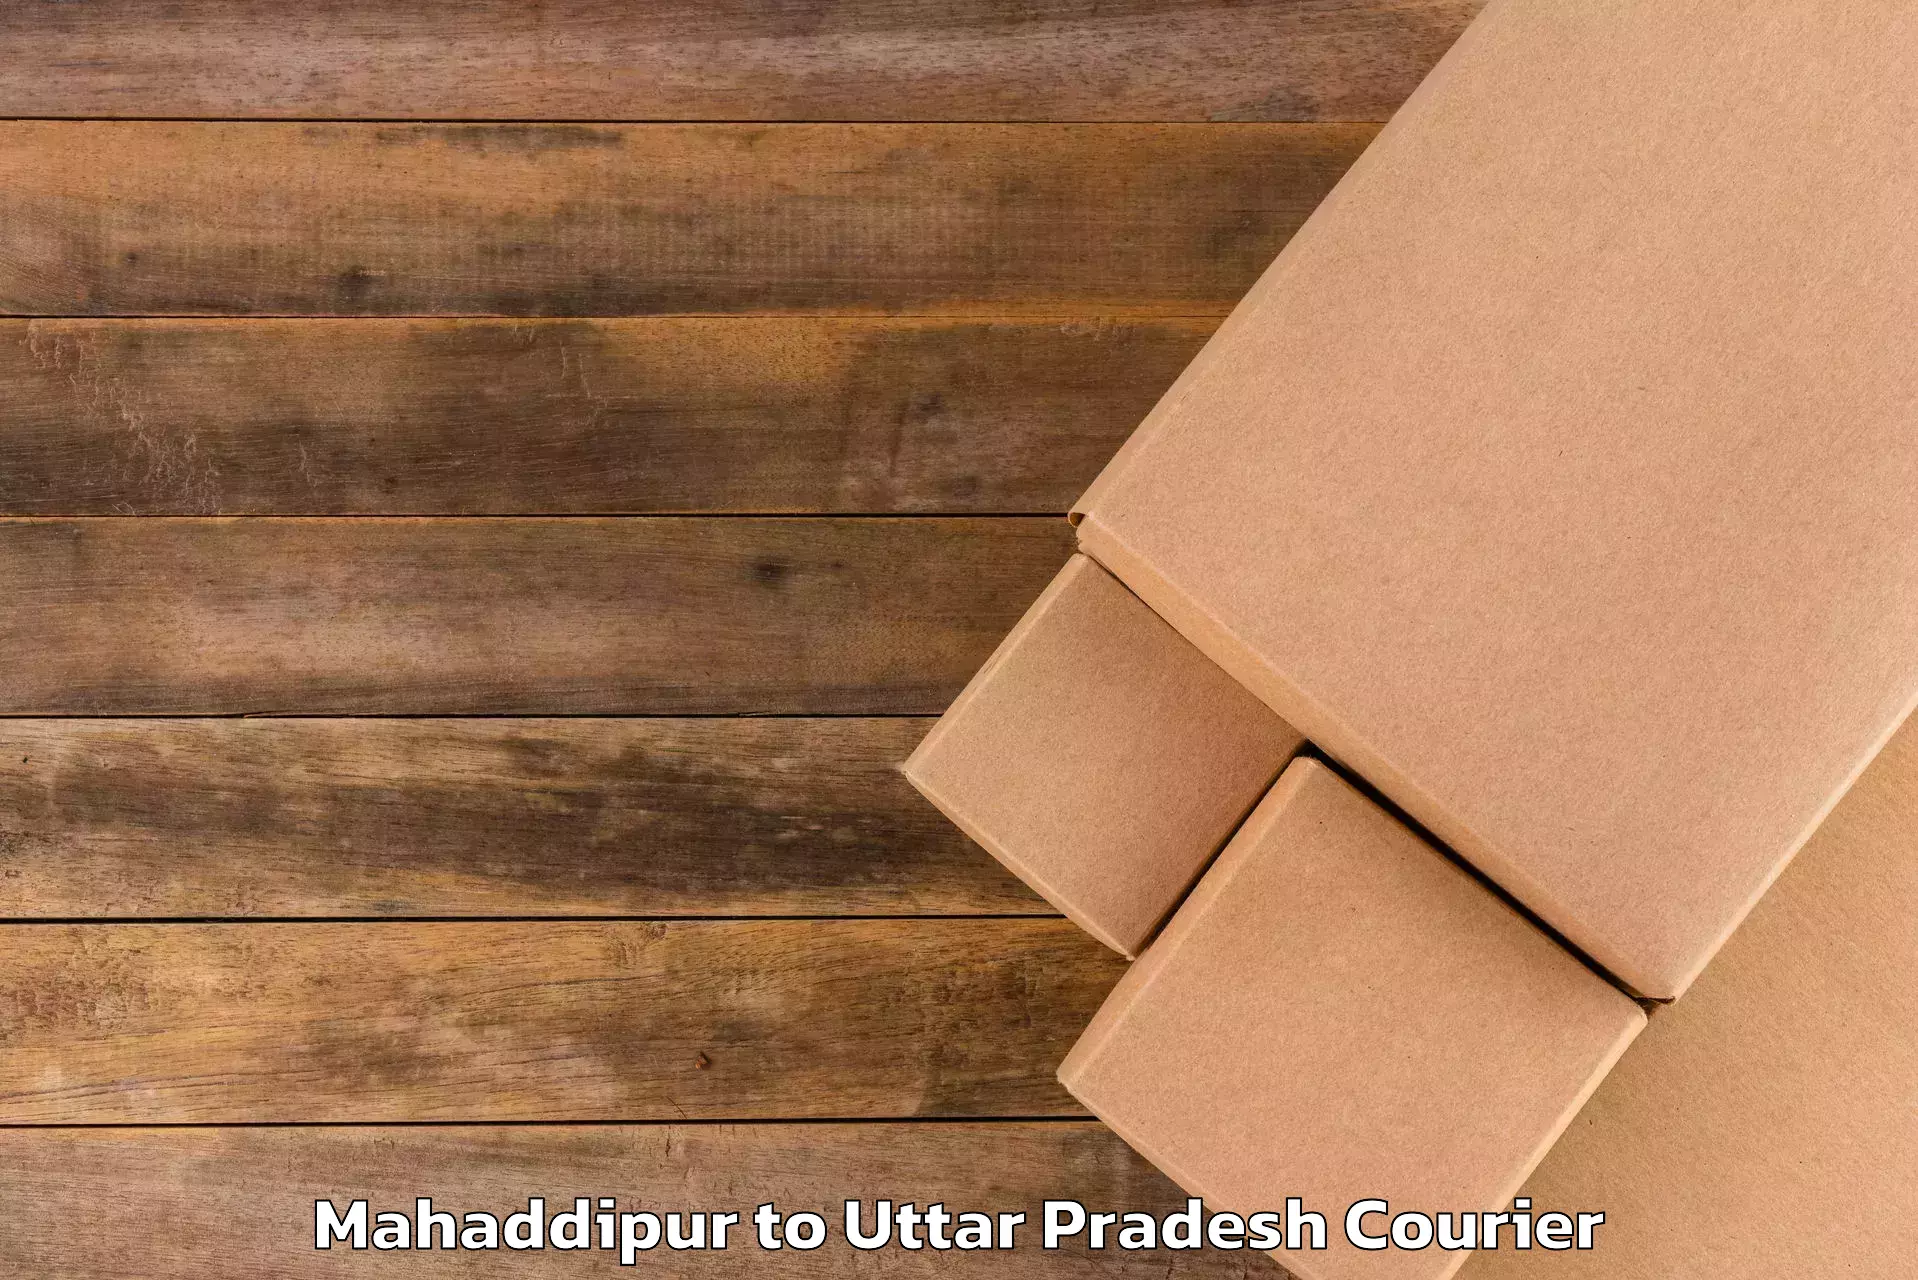 Online luggage shipping booking Mahaddipur to Hathras